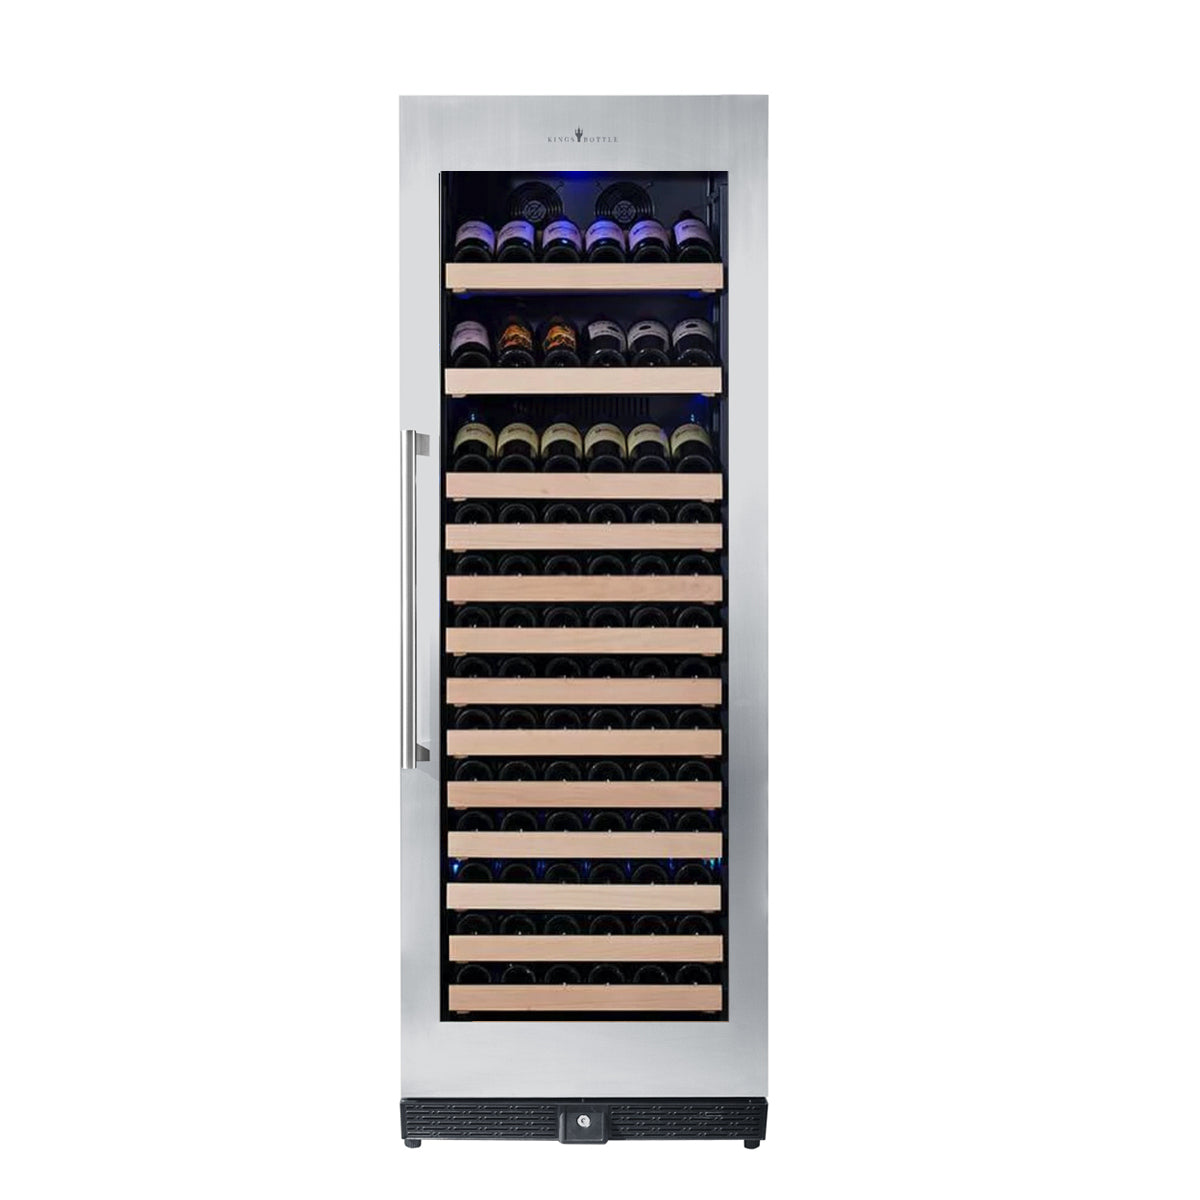 Tall Large Wine Cooler Refrigerator Drinks Cabinet with Stainless Steel Trim